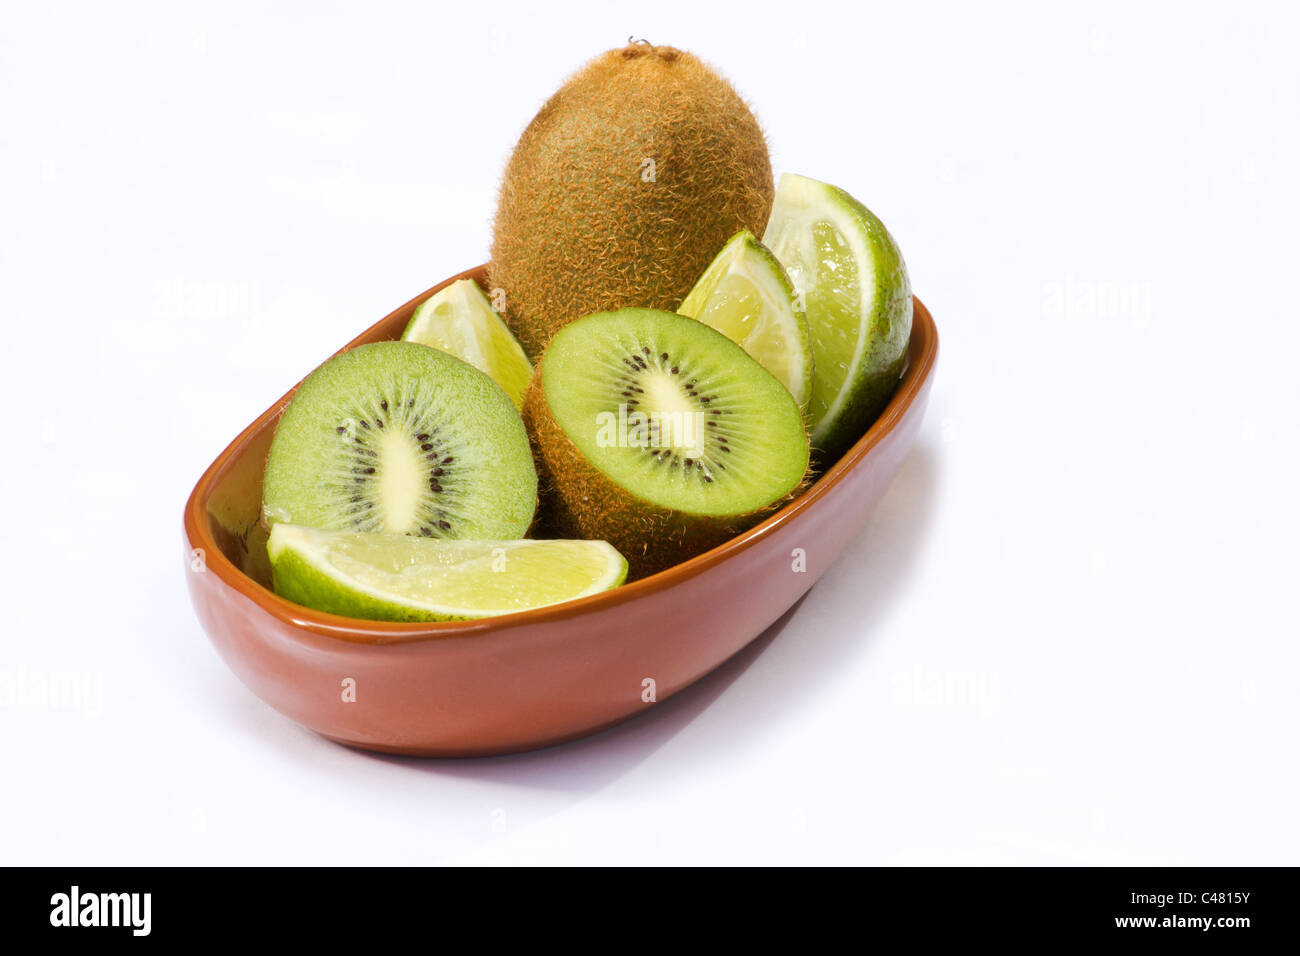 Close-up of kiwis and lime quarters in terracotta bowl on white background Stock Photo